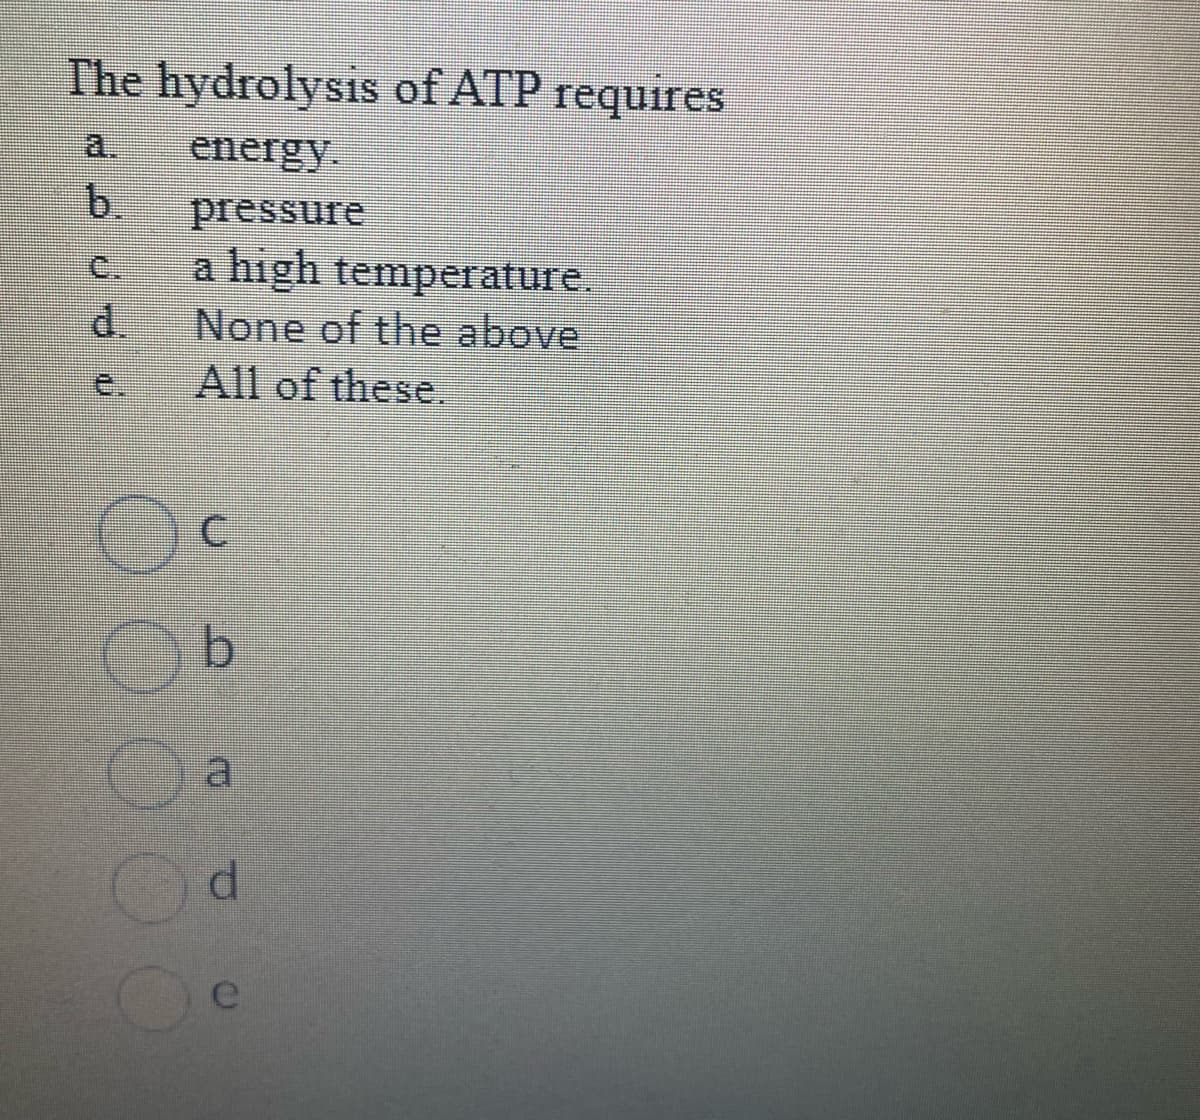 The hydrolysis of ATP requires
energy.
pressure
a high temperature.
None of the above
All of these.
b.
d
C
b
d
e